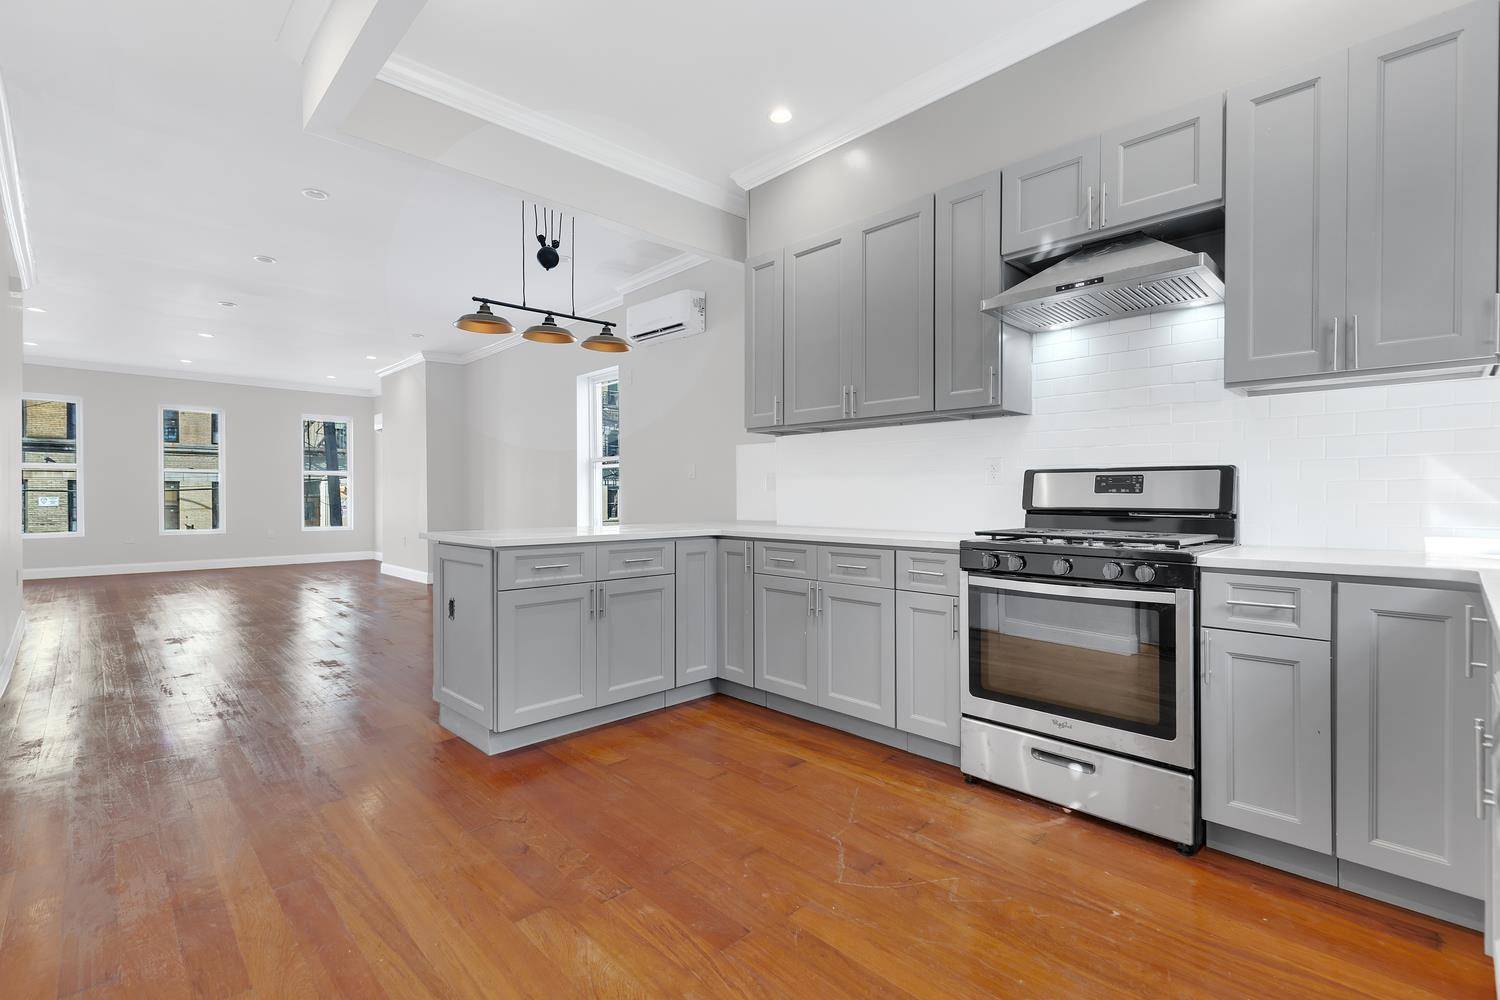 Superb opportunity to own this stunning, two Family semi detached townhouse in Mott Haven.